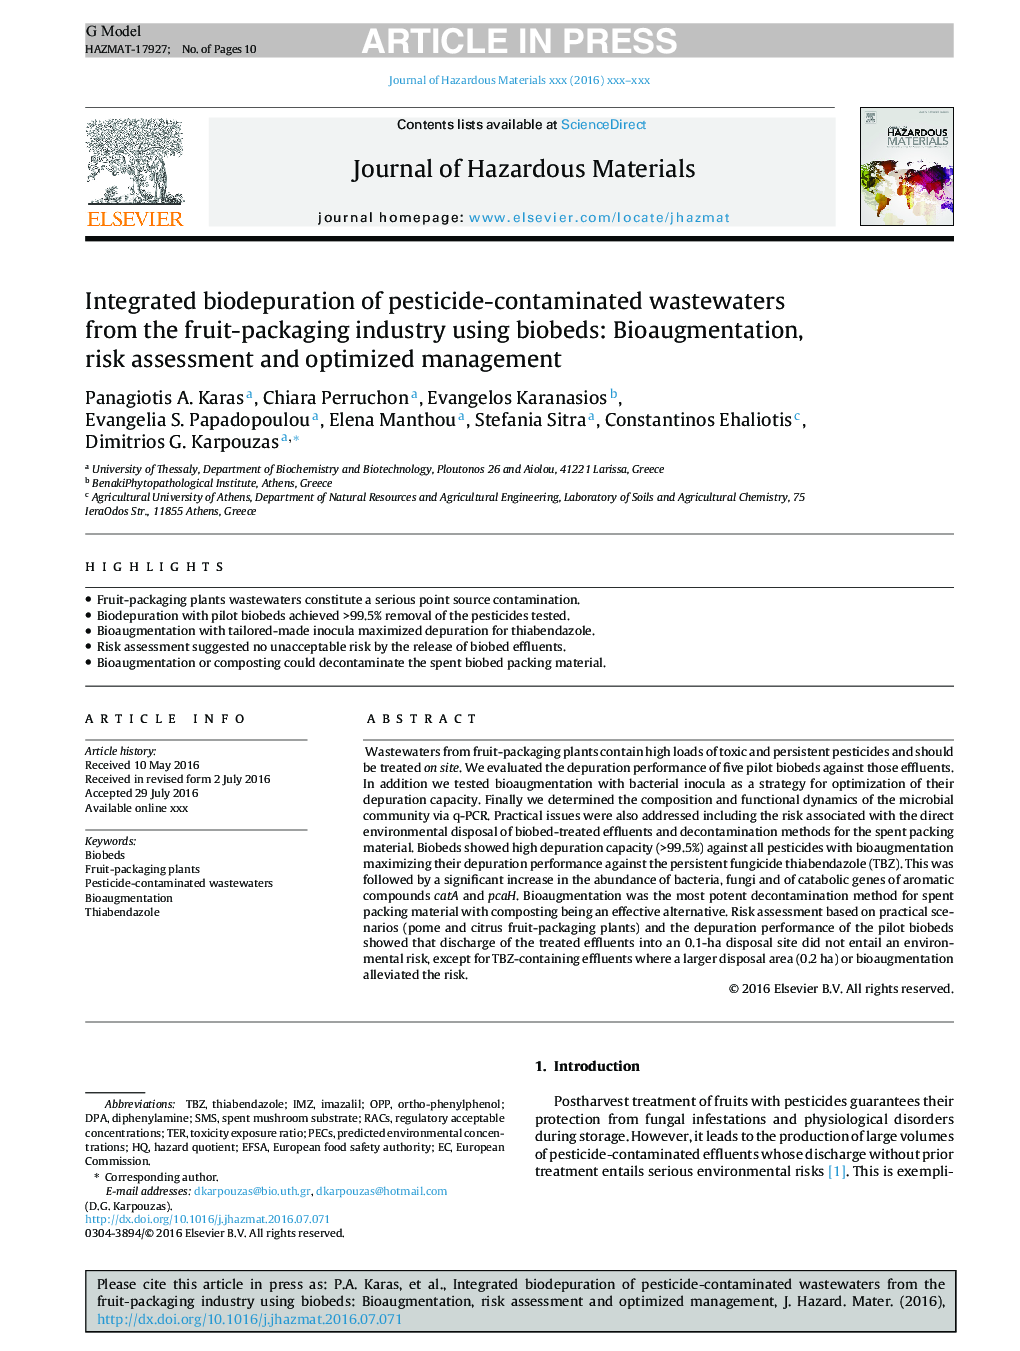 Integrated biodepuration of pesticide-contaminated wastewaters from the fruit-packaging industry using biobeds: Bioaugmentation, risk assessment and optimized management